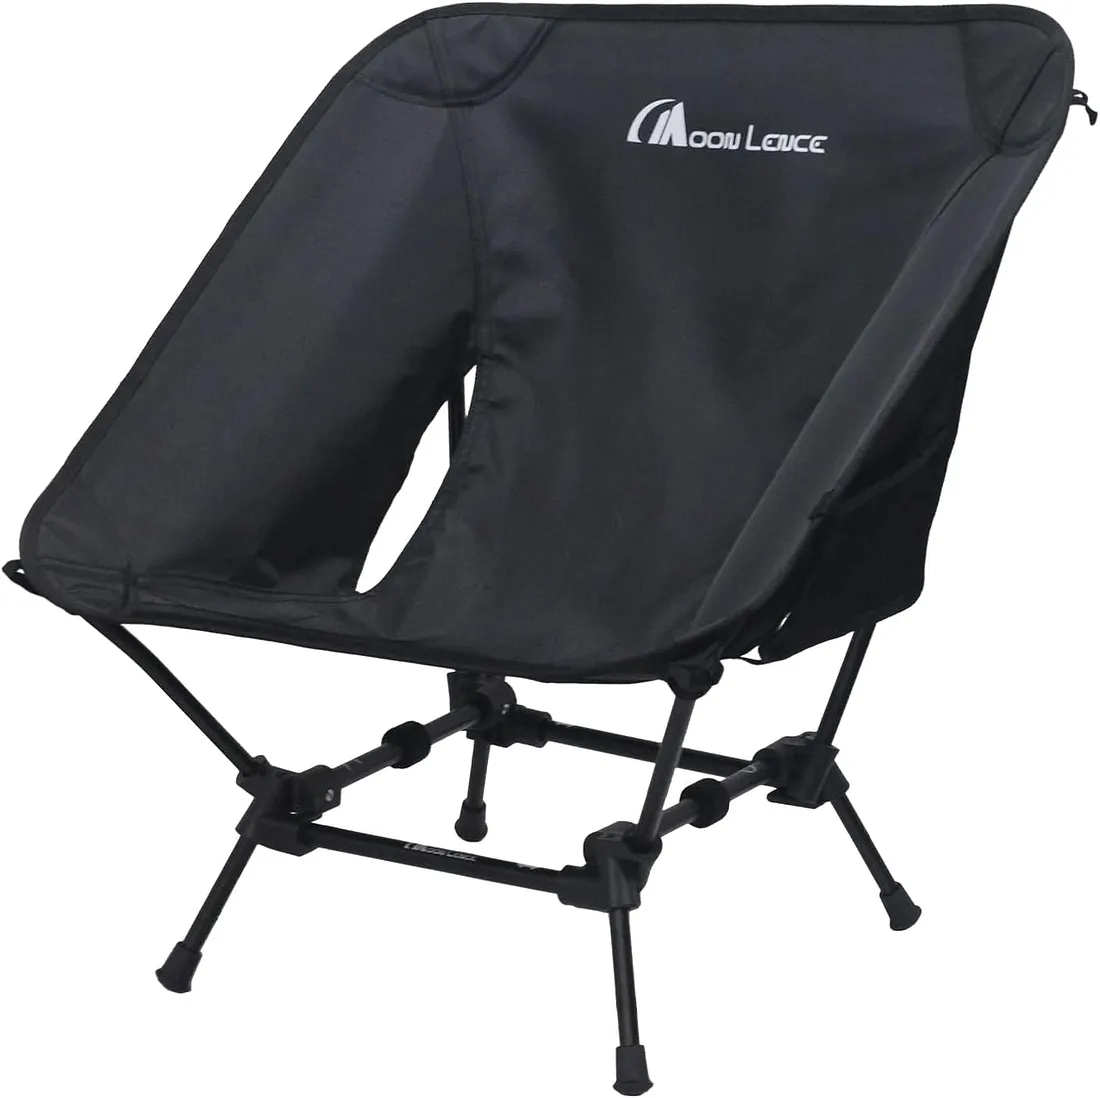 Moon Lence Backpacking Chair Backpacking Chair